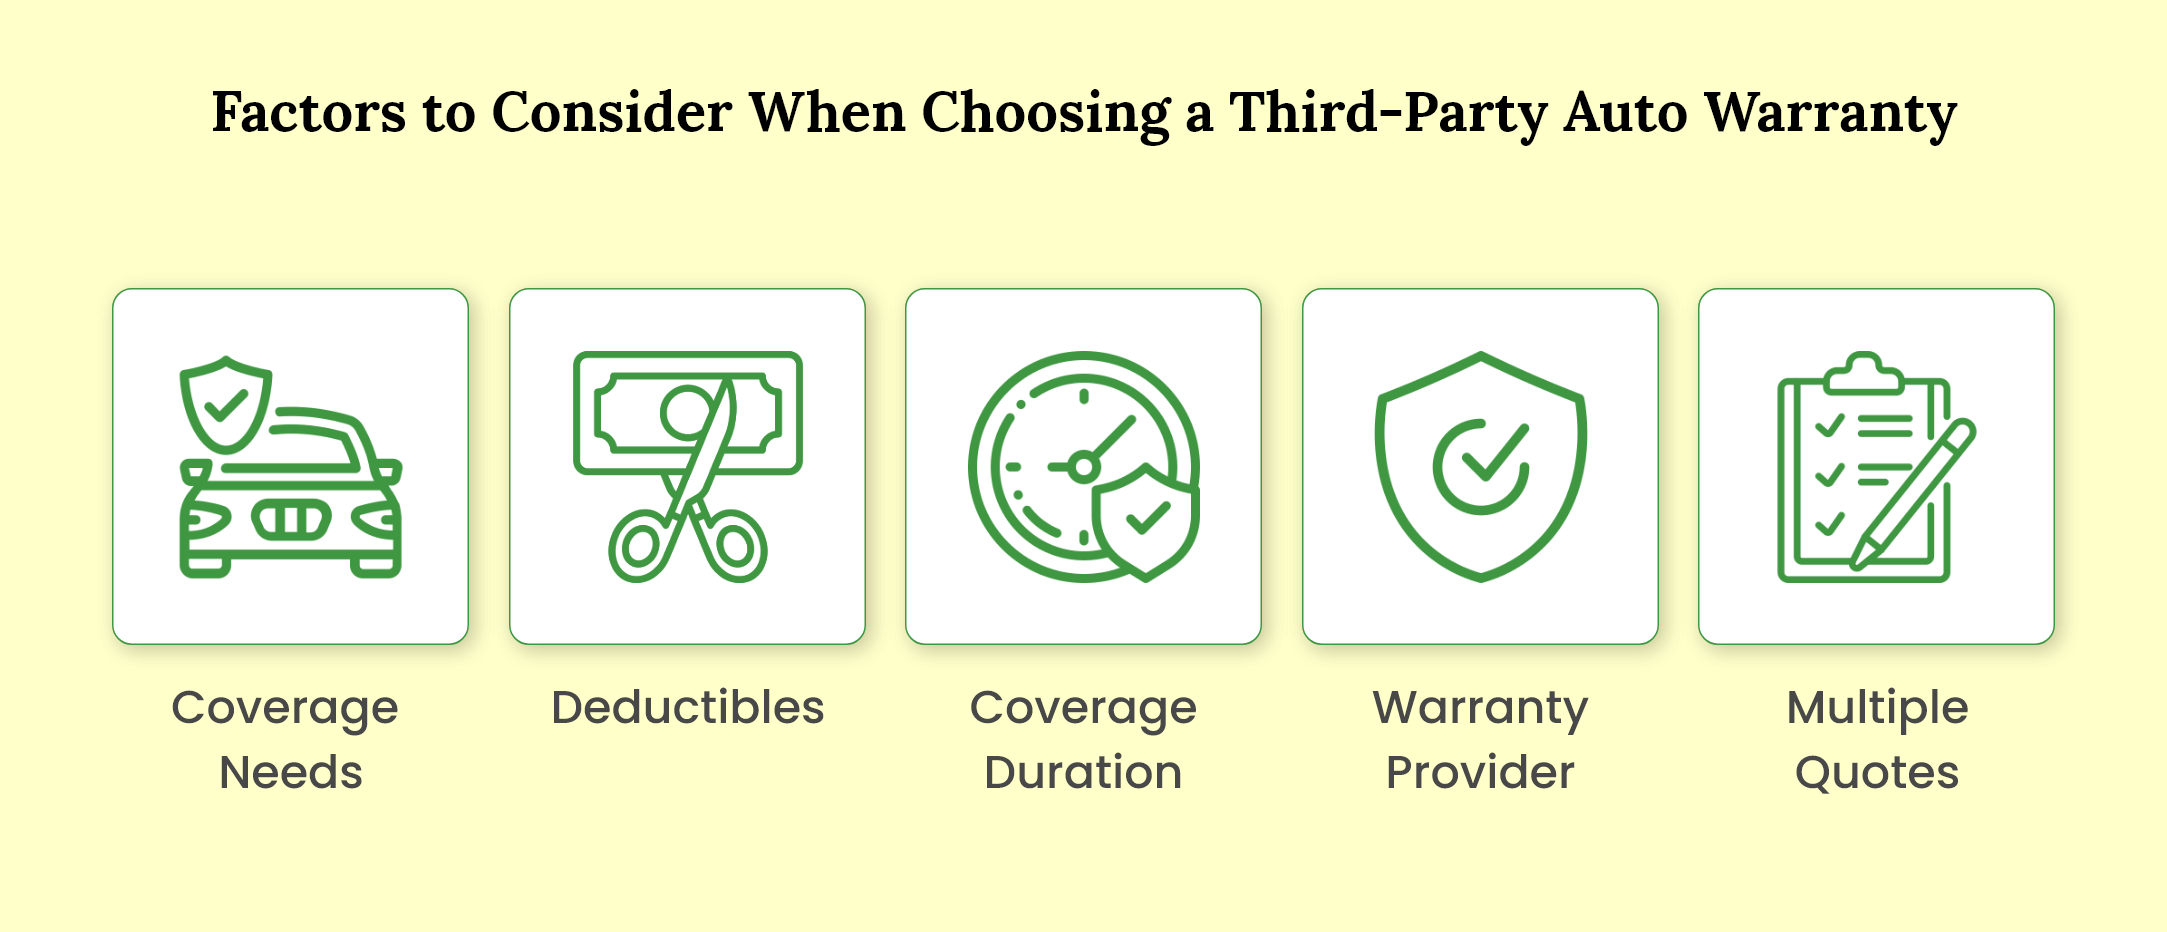 an image representing various factors to consider while choosing a third-party auto warranty